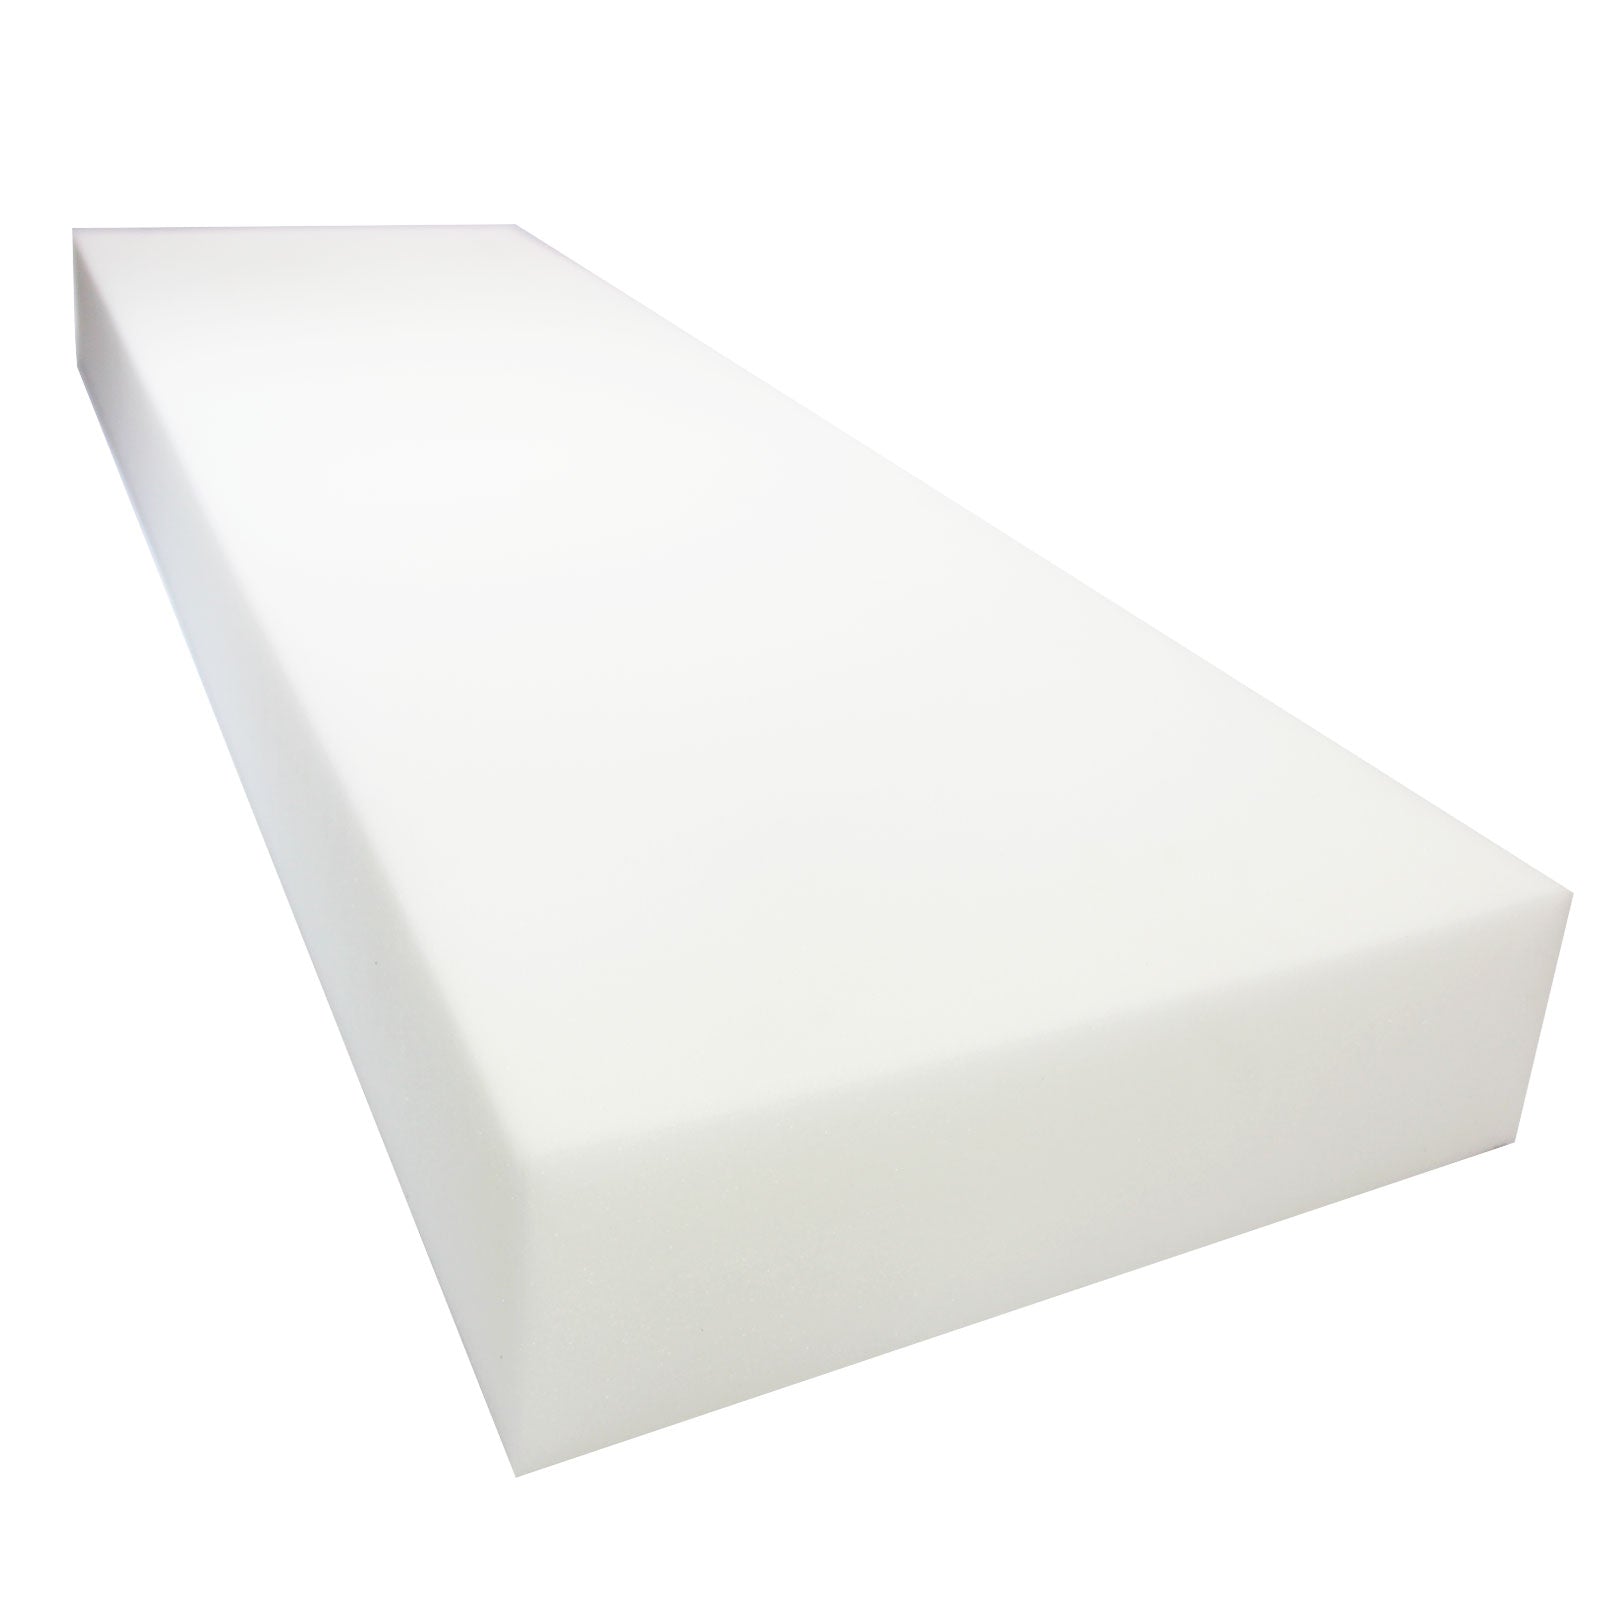  Frienda 2 Pcs Upholstery Foam 2 Inch Thick 24 Wide 72 Inches  Long Density Seat Replacement Cushion Foam Padding Upholstery Supplies  Upholstery Sheet for Dinning Chairs Home or Commercial Use, White 